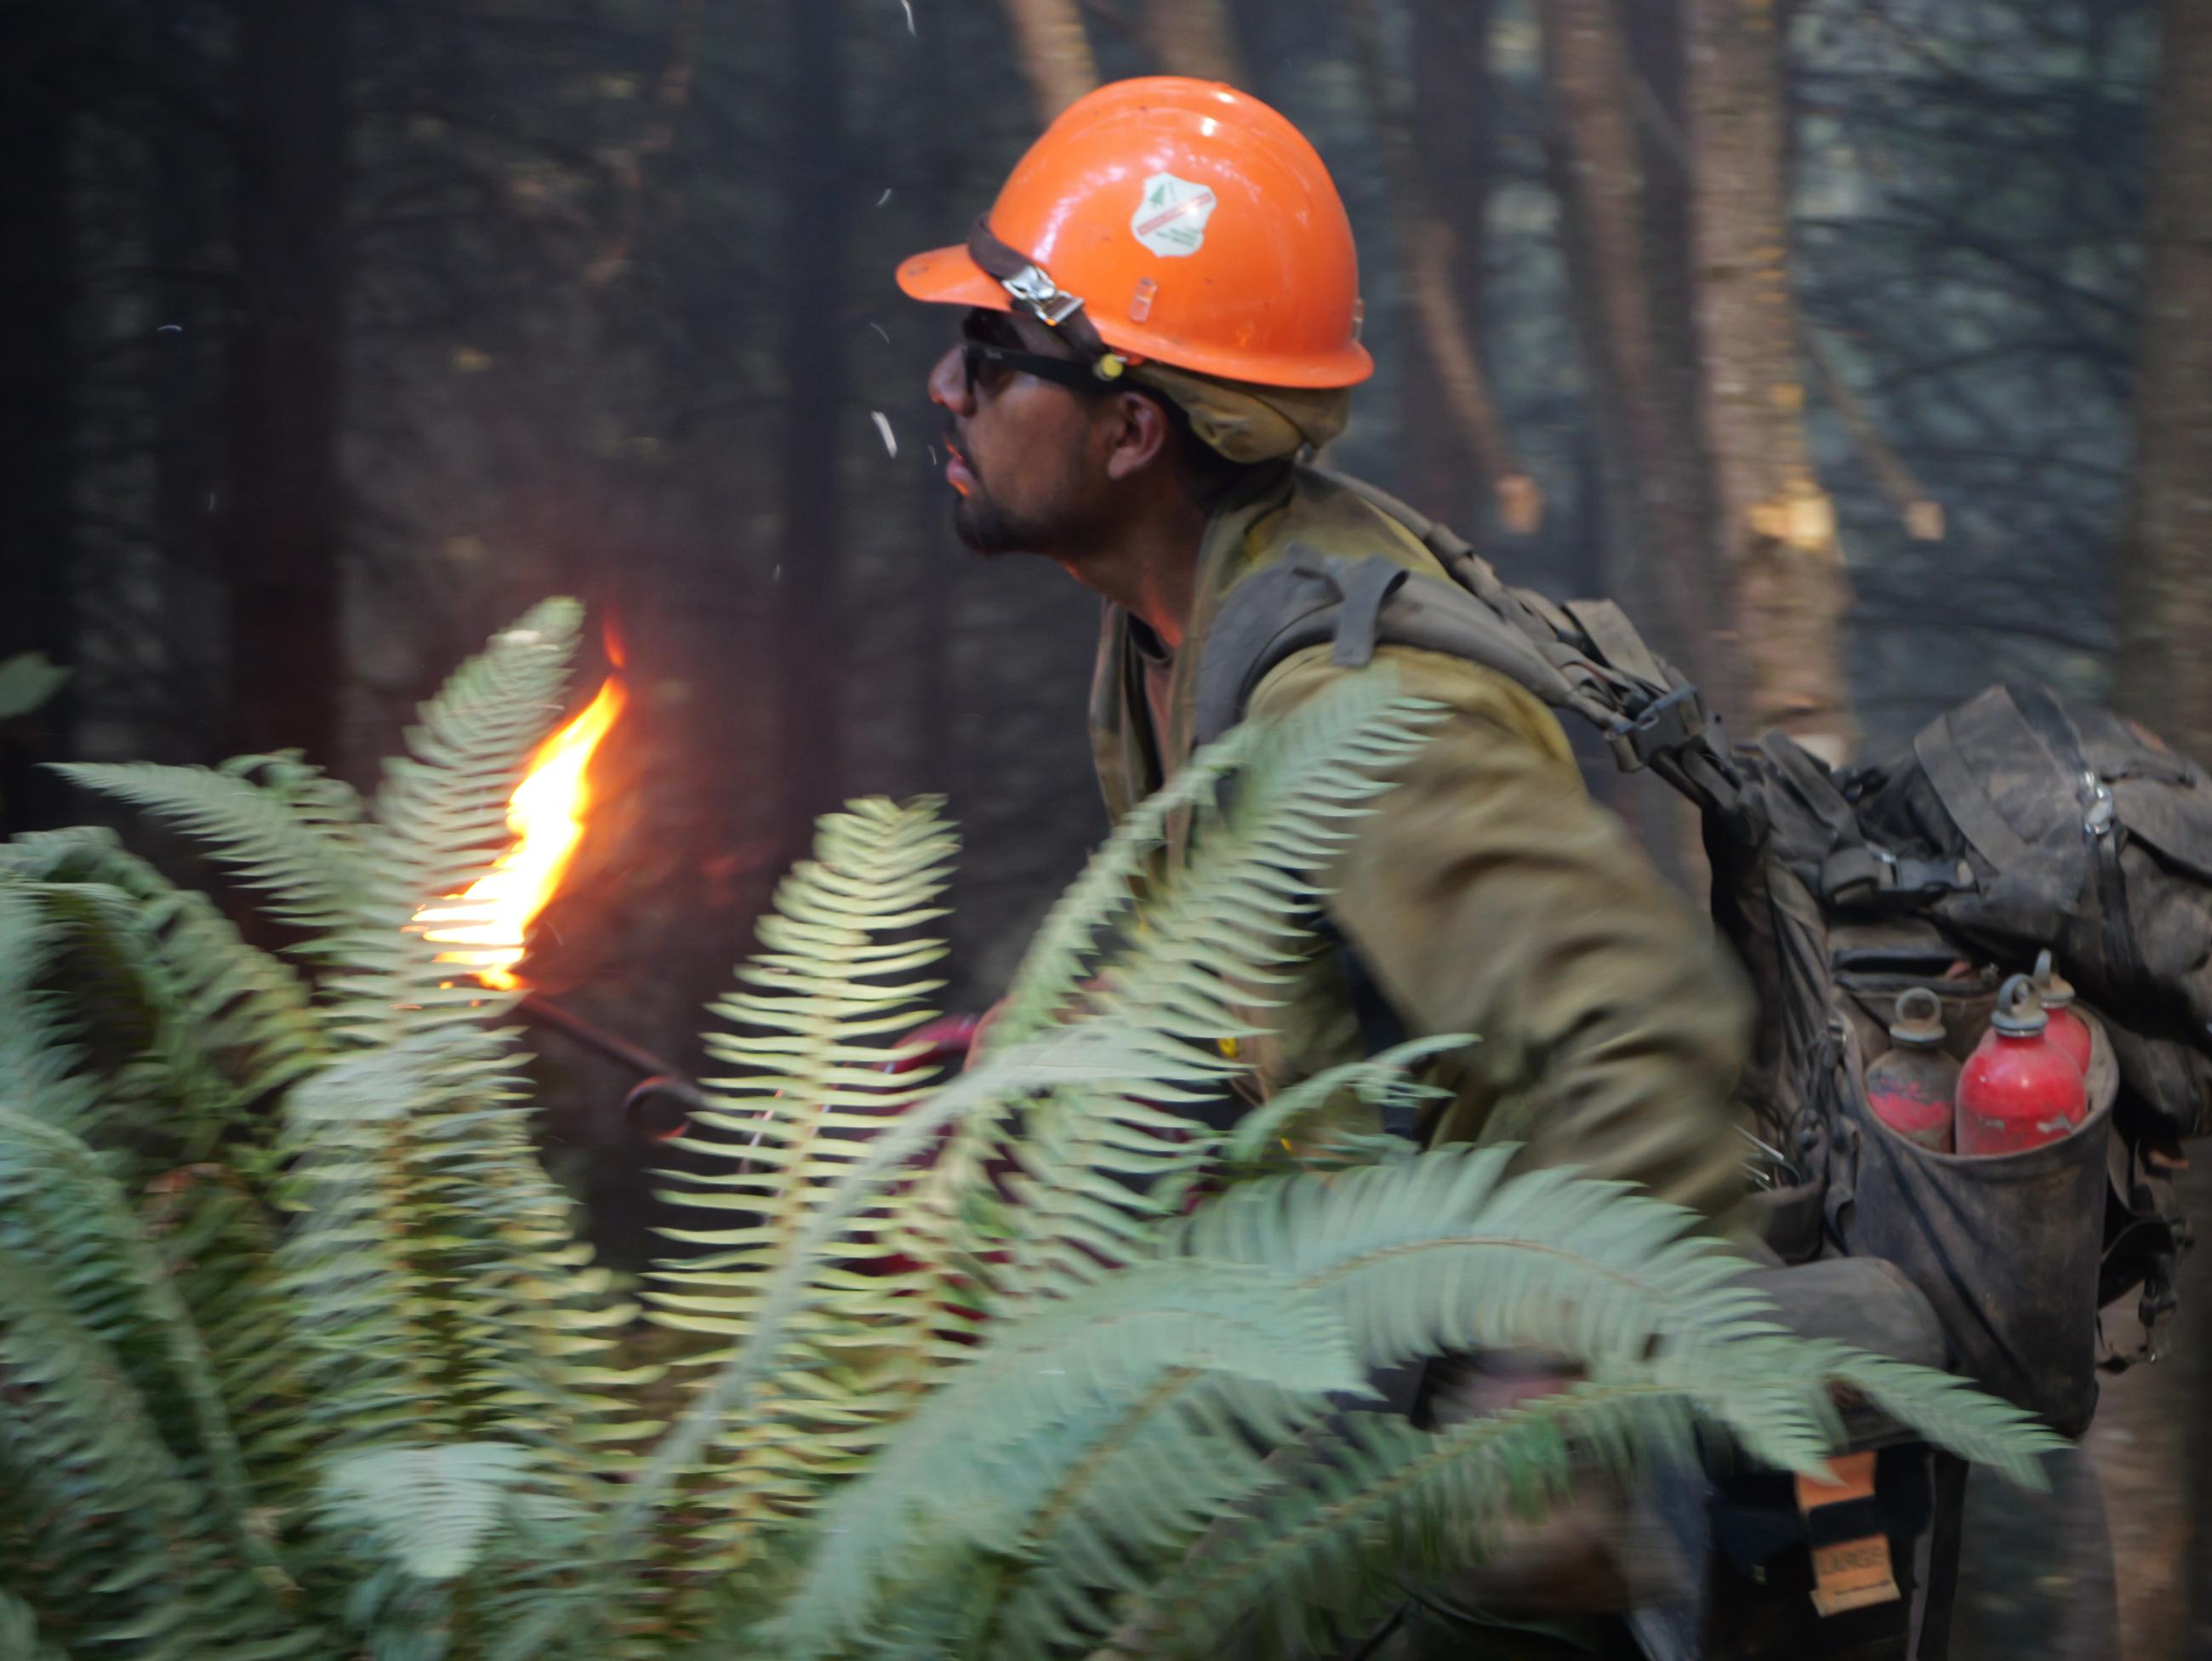 Ferns are shown in front of a firefighter holding a flaming "drip" torch, wearing a pack and an orange helmet.